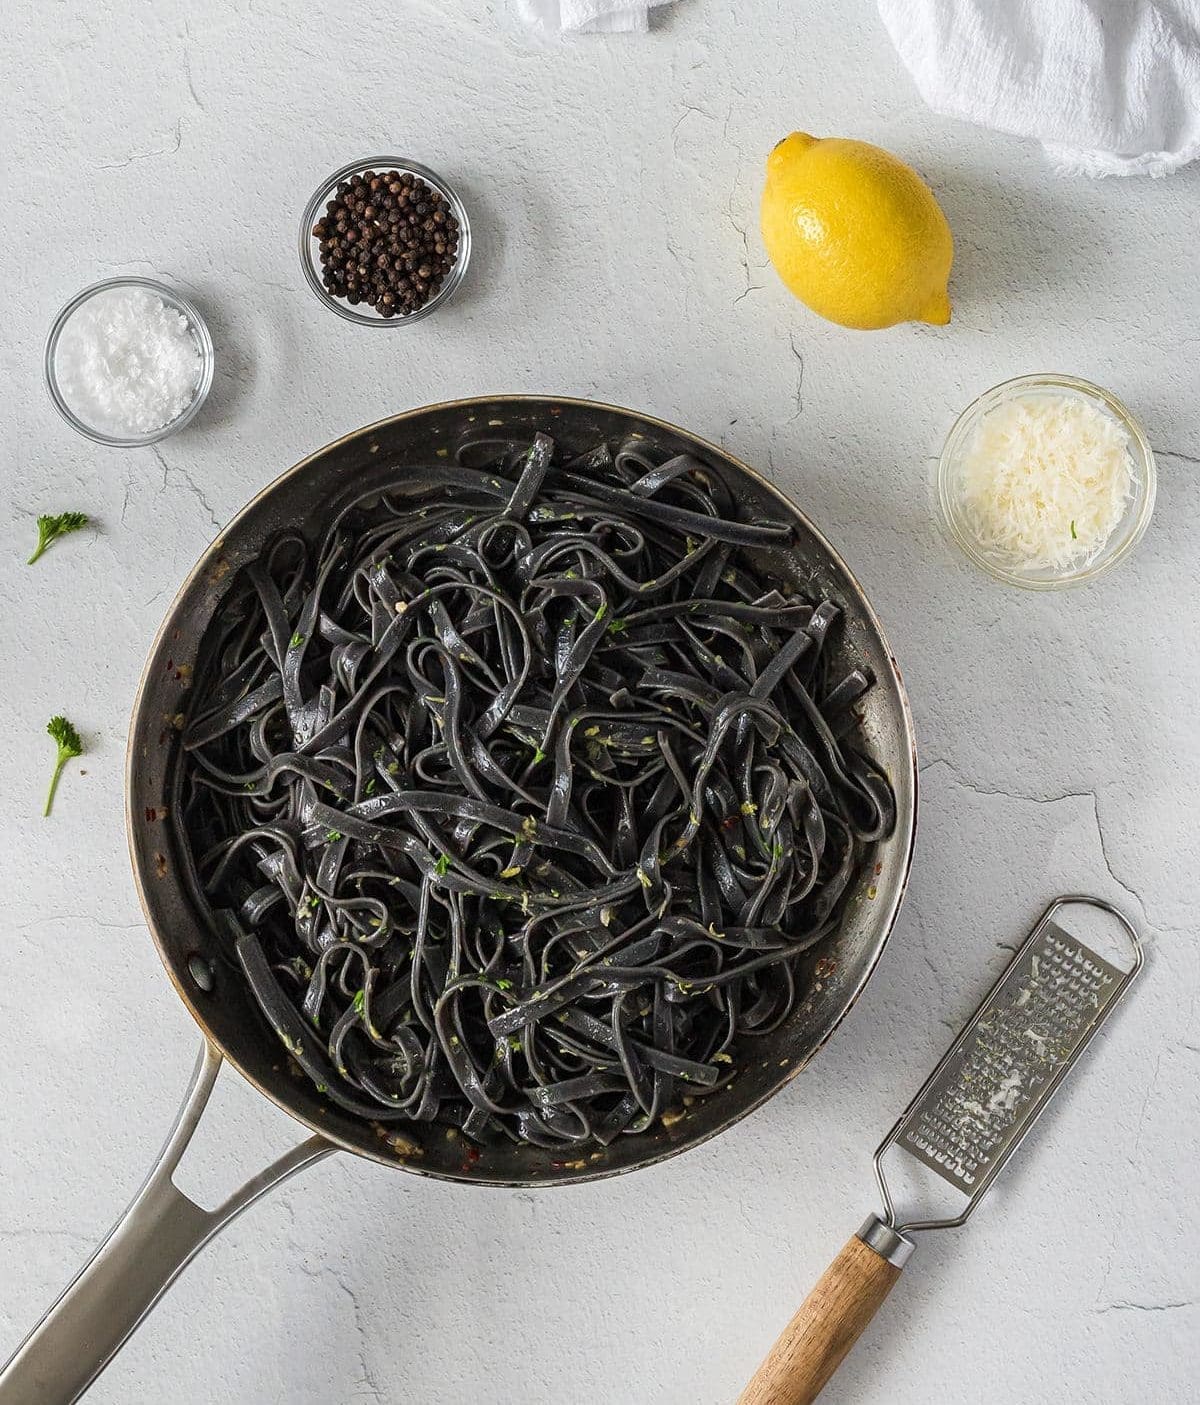 Silver skillet filled with cooked squid ink pasta.